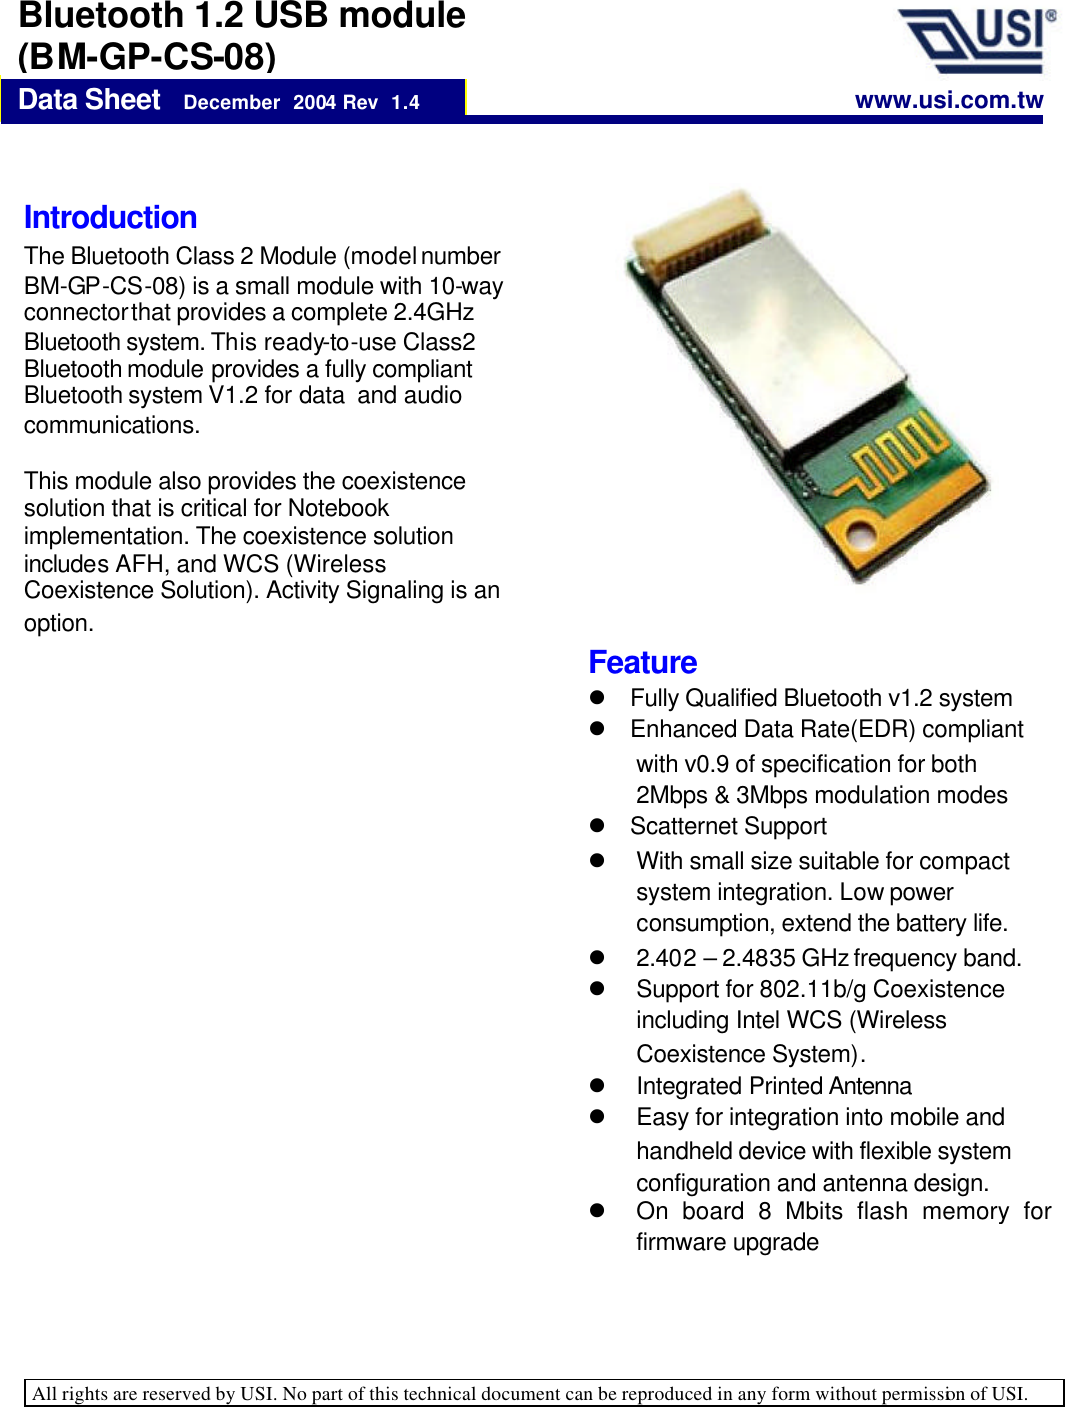   All rights are reserved by USI. No part of this technical document can be reproduced in any form without permission of USI.    Data Sheet   December  2004 Rev  1.4 Bluetooth 1.2 USB module (BM-GP-CS-08) Introduction  The Bluetooth Class 2 Module (model number BM-GP-CS-08) is a small module with 10-way connector that provides a complete 2.4GHz Bluetooth system. This ready-to-use Class2 Bluetooth module provides a fully compliant Bluetooth system V1.2 for data  and audio communications.   This module also provides the coexistence solution that is critical for Notebook implementation. The coexistence solution includes AFH, and WCS (Wireless Coexistence Solution). Activity Signaling is an option.   www.usi.com.tw Feature l Fully Qualified Bluetooth v1.2 system l Enhanced Data Rate(EDR) compliant with v0.9 of specification for both 2Mbps &amp; 3Mbps modulation modes l Scatternet Support l With small size suitable for compact system integration. Low power consumption, extend the battery life. l 2.402 – 2.4835 GHz frequency band. l Support for 802.11b/g Coexistence including Intel WCS (Wireless Coexistence System). l Integrated Printed Antenna l Easy for integration into mobile and handheld device with flexible system configuration and antenna design. l On board 8 Mbits flash memory for firmware upgrade 